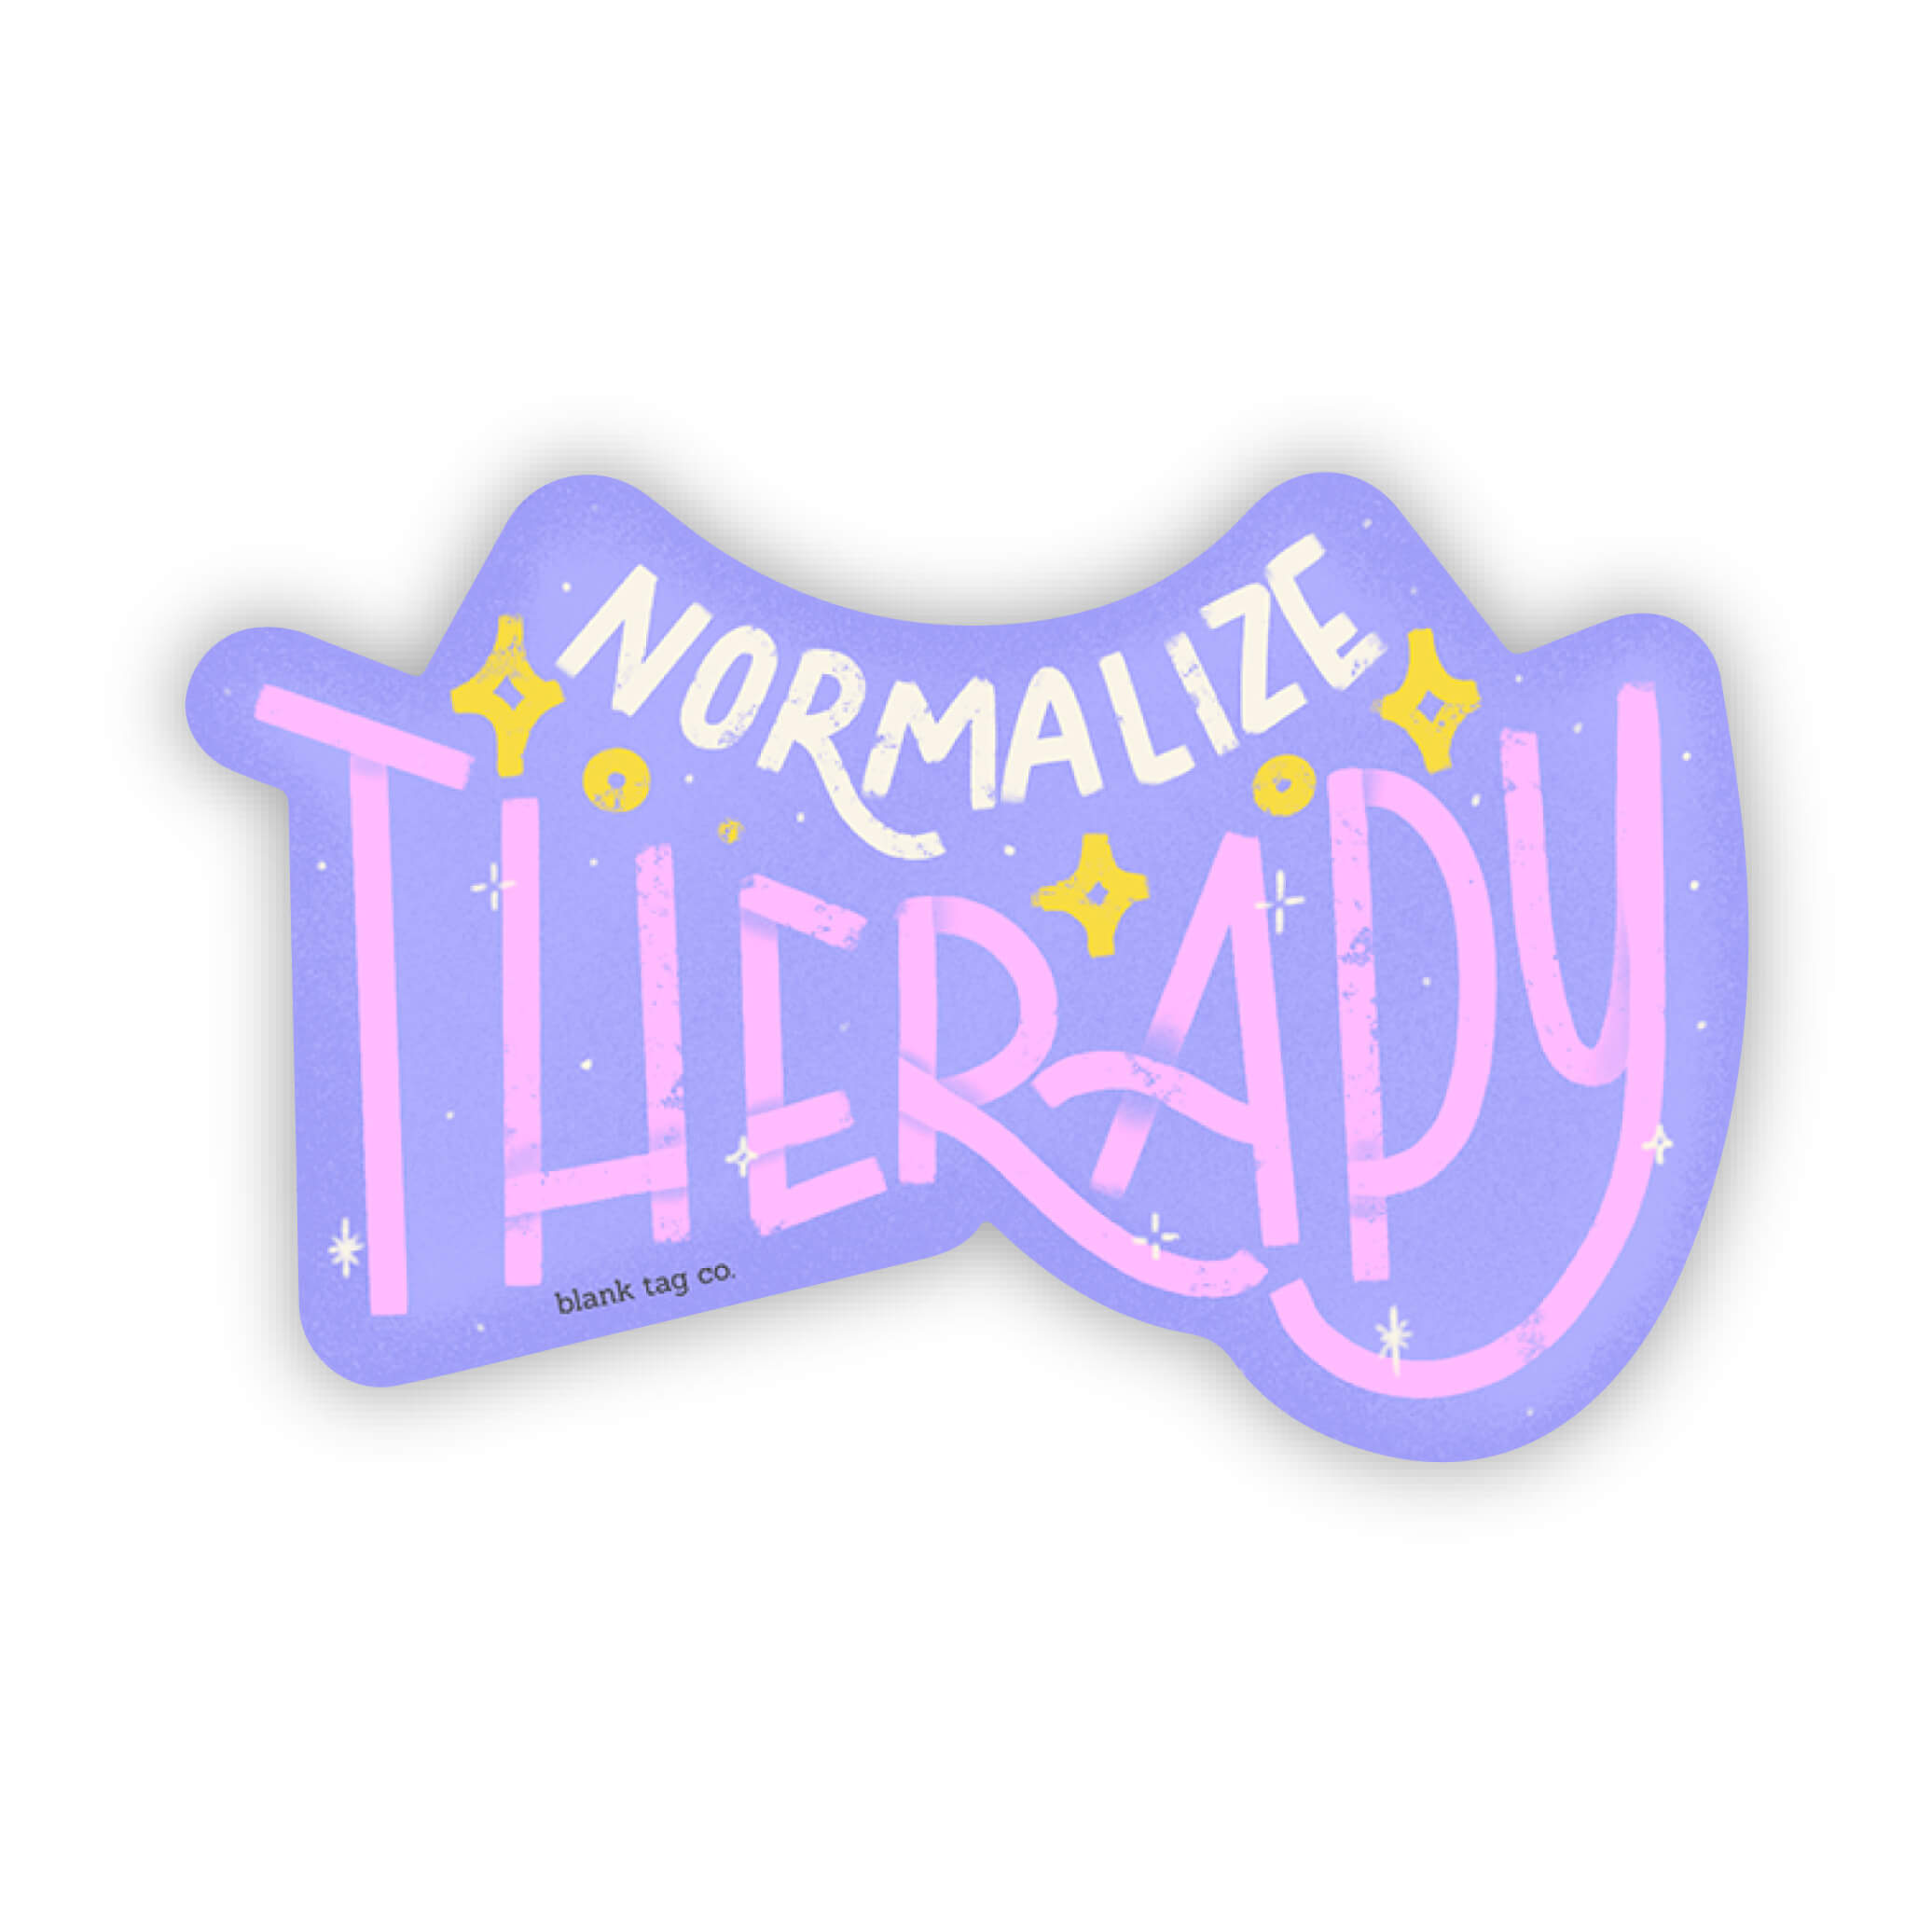 The Normalize Therapy Sticker